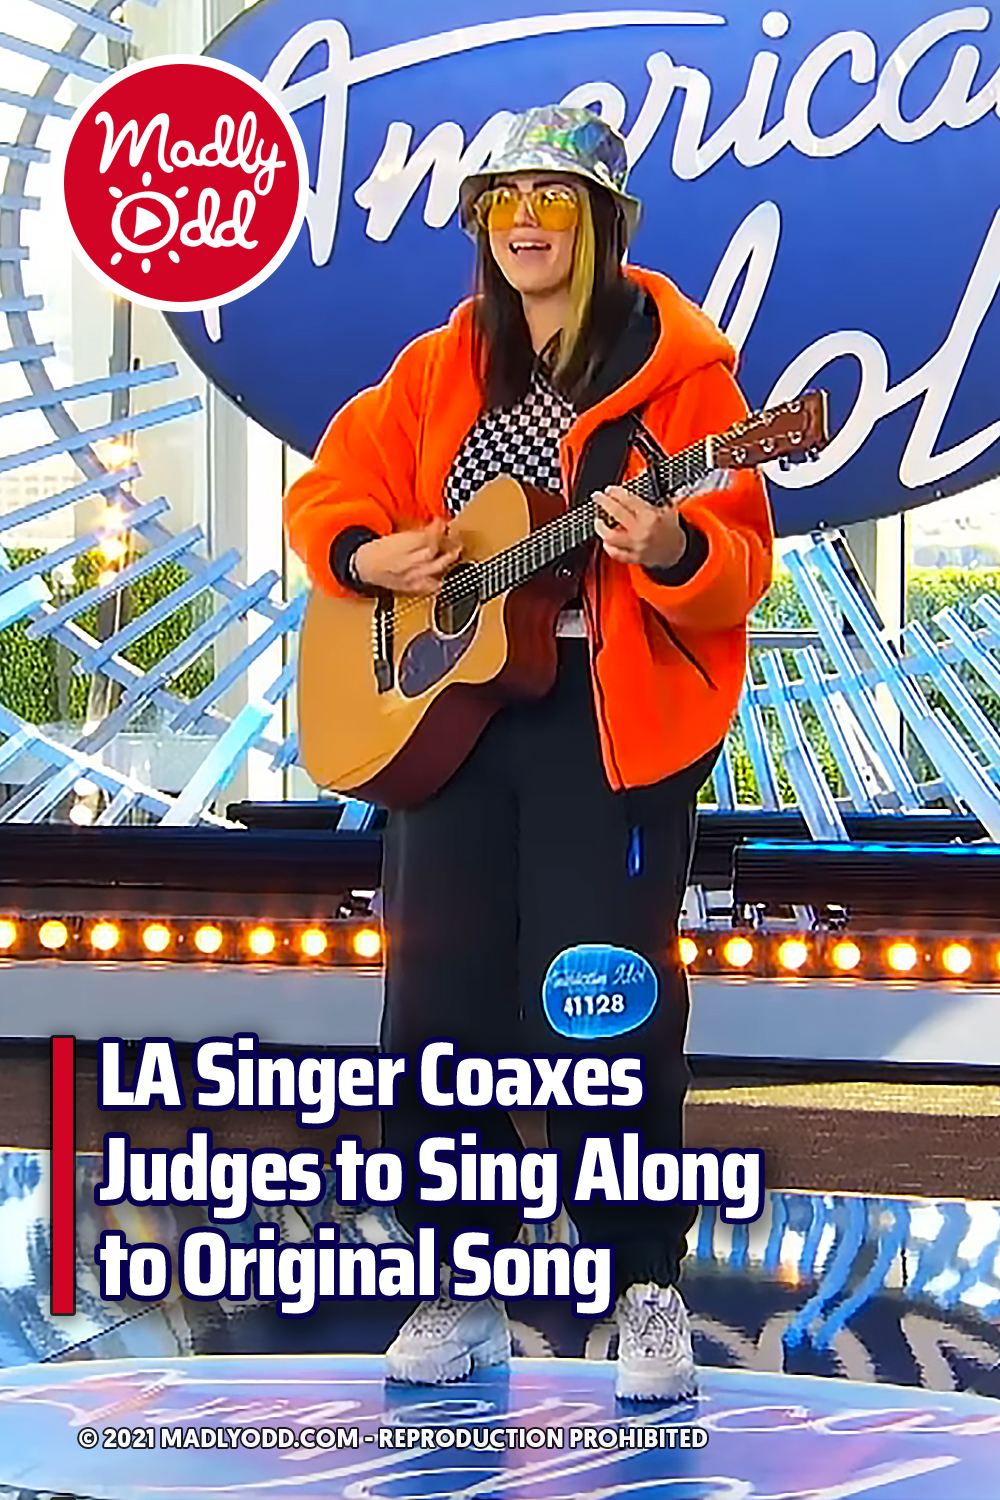 LA Singer Coaxes Judges to Sing Along to Original Song